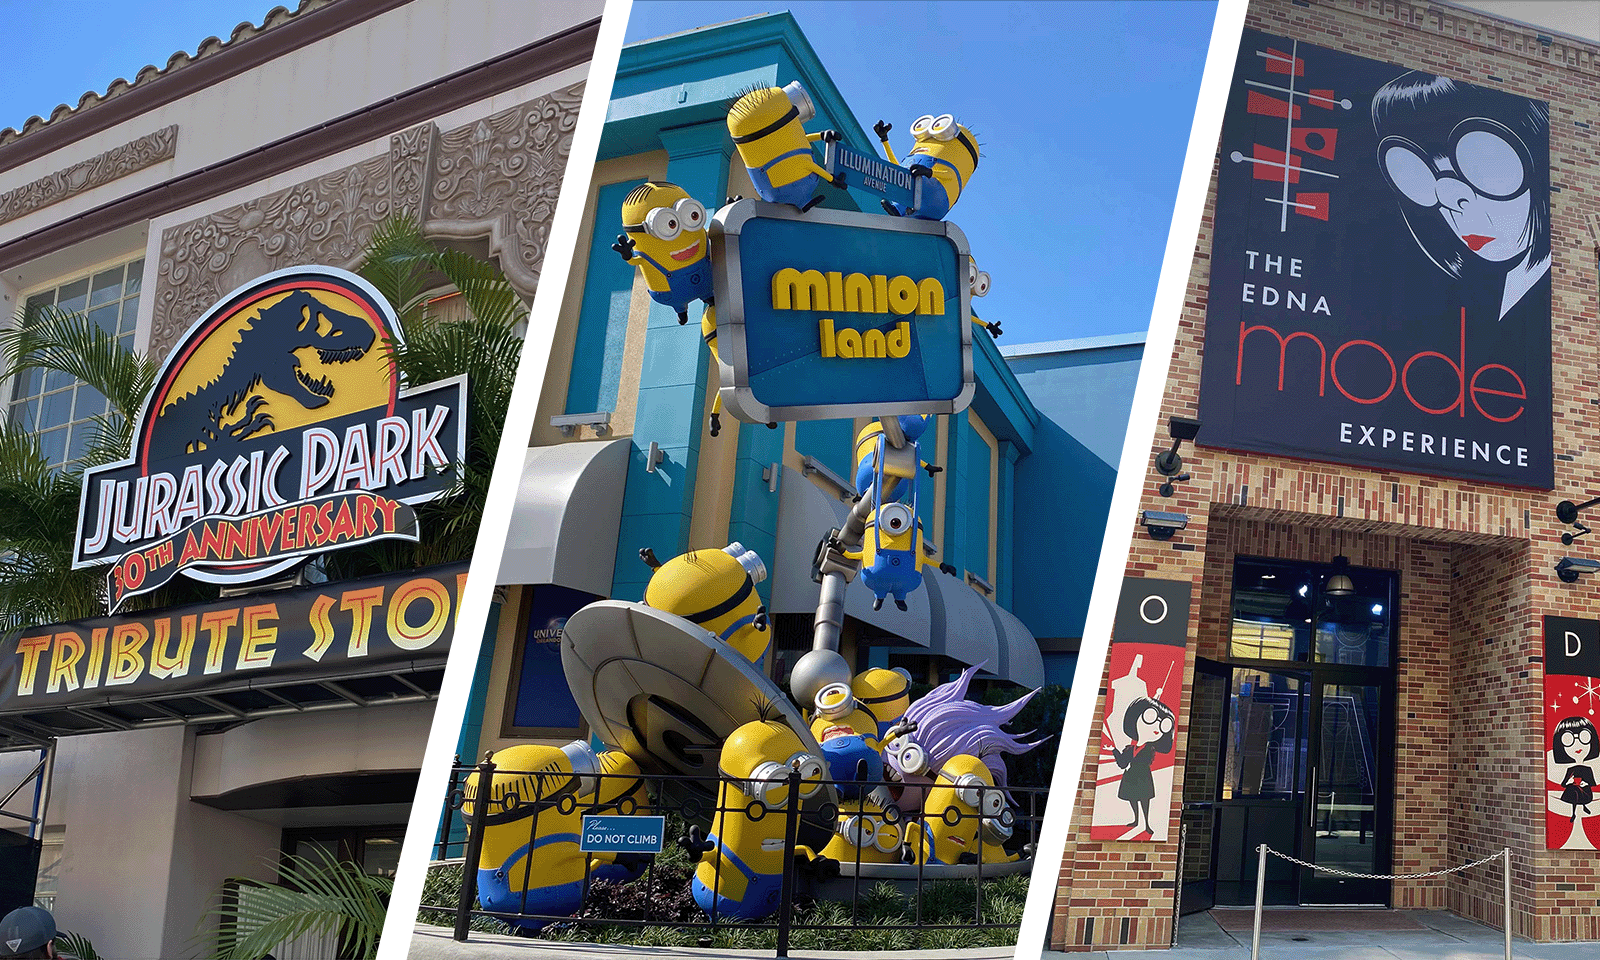 jurassic park store, minionland, and edna mode experience sign